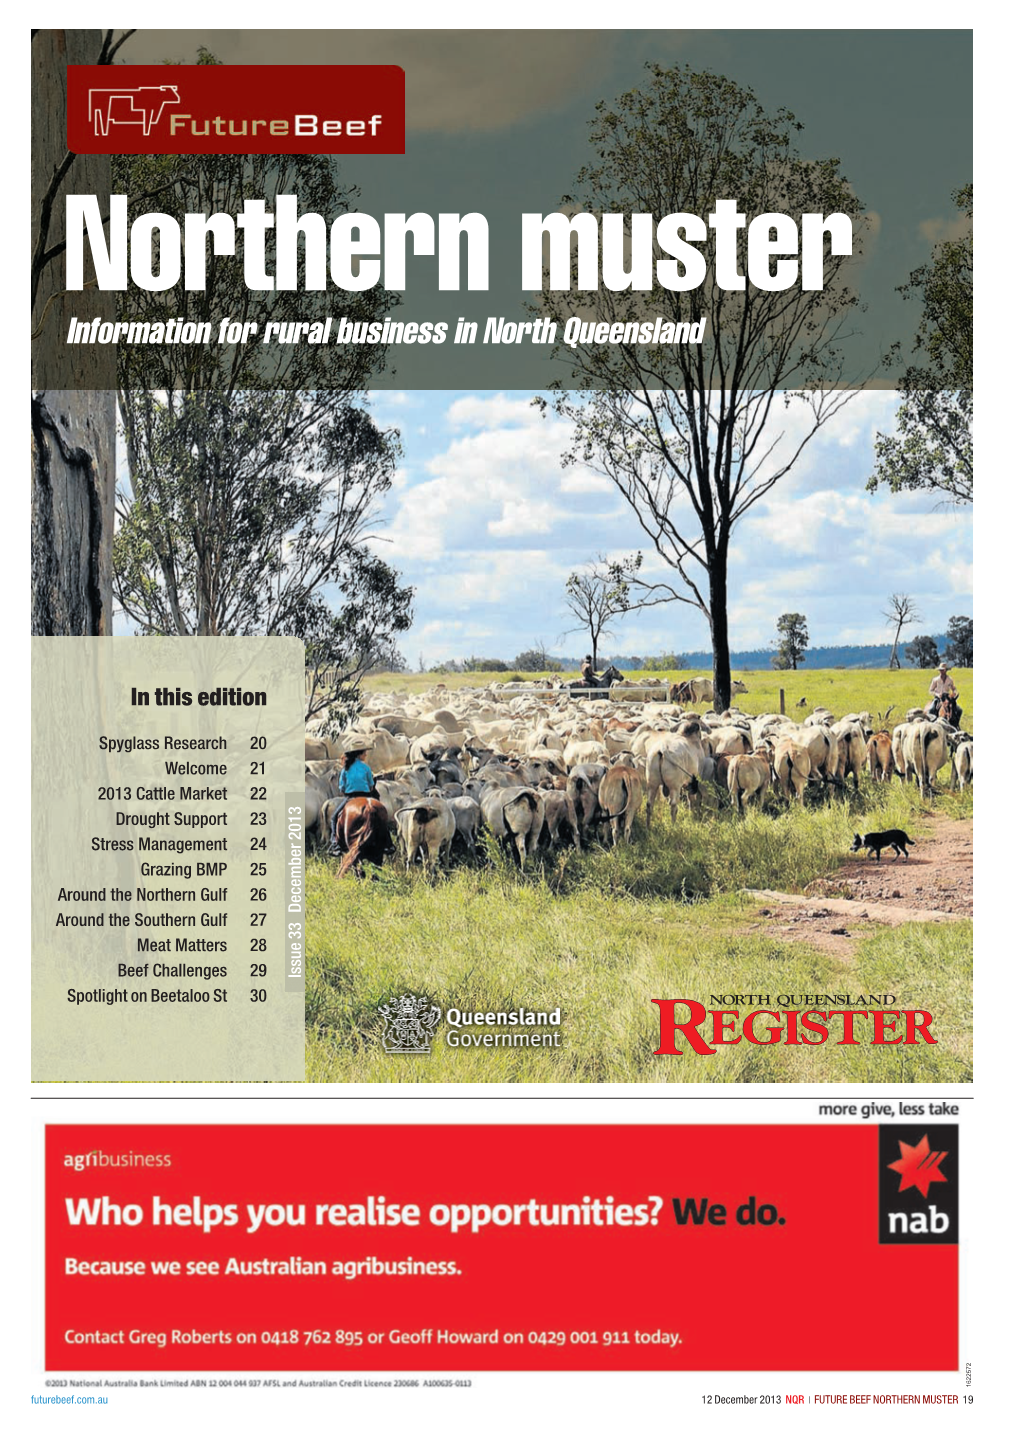 Information for Rural Business in North Queensland